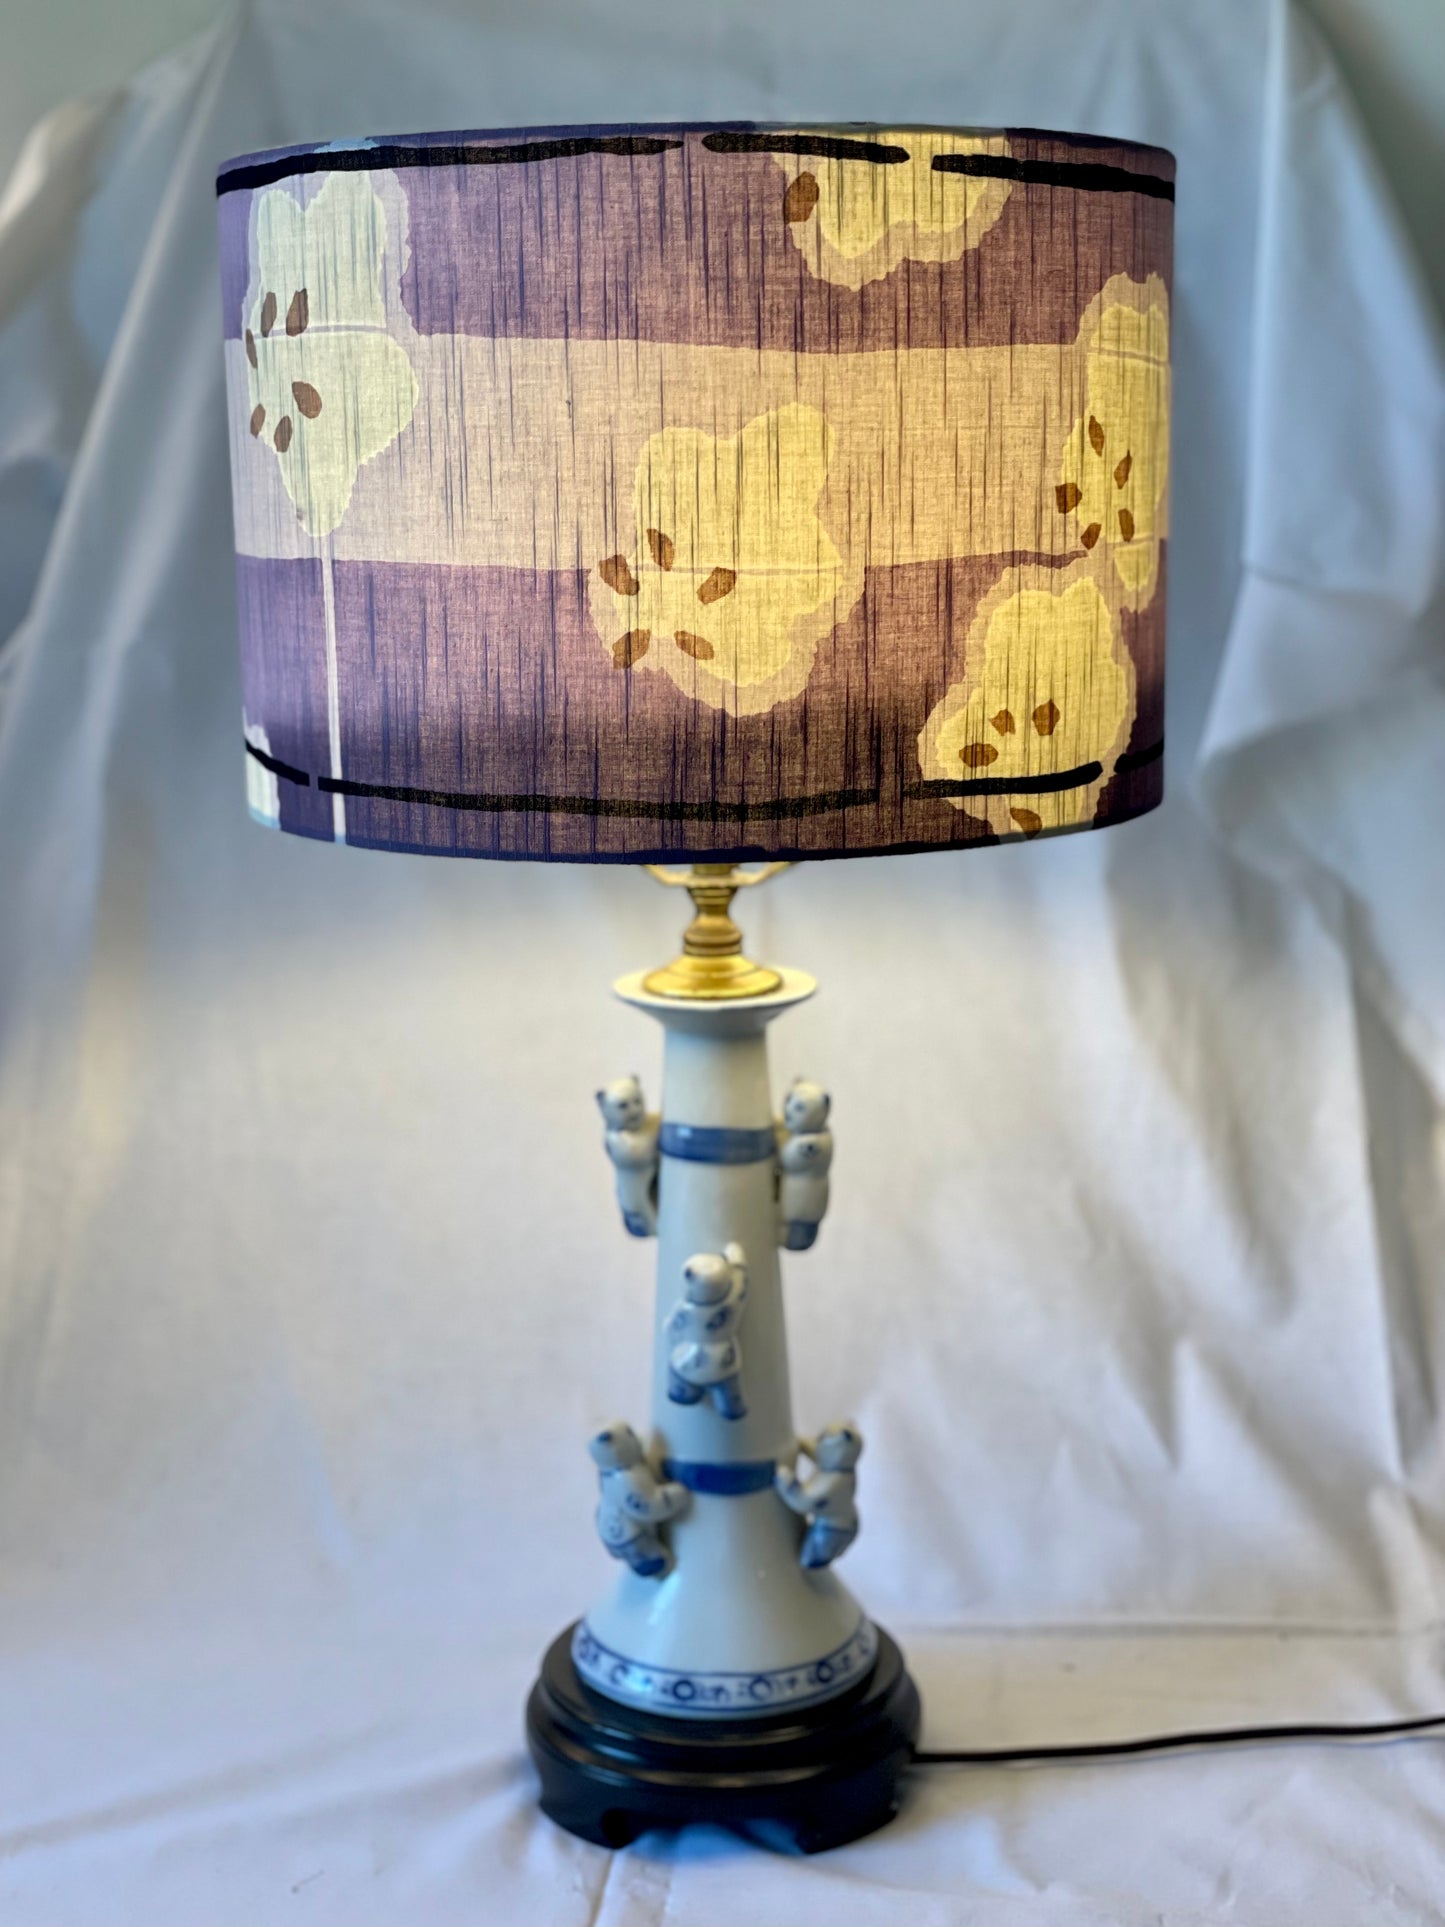 12 Inch Drum Shade. Vintage Summer Kimono Fabric. Slightly Textured shades of Lilac, Smoky Purple and Grey.